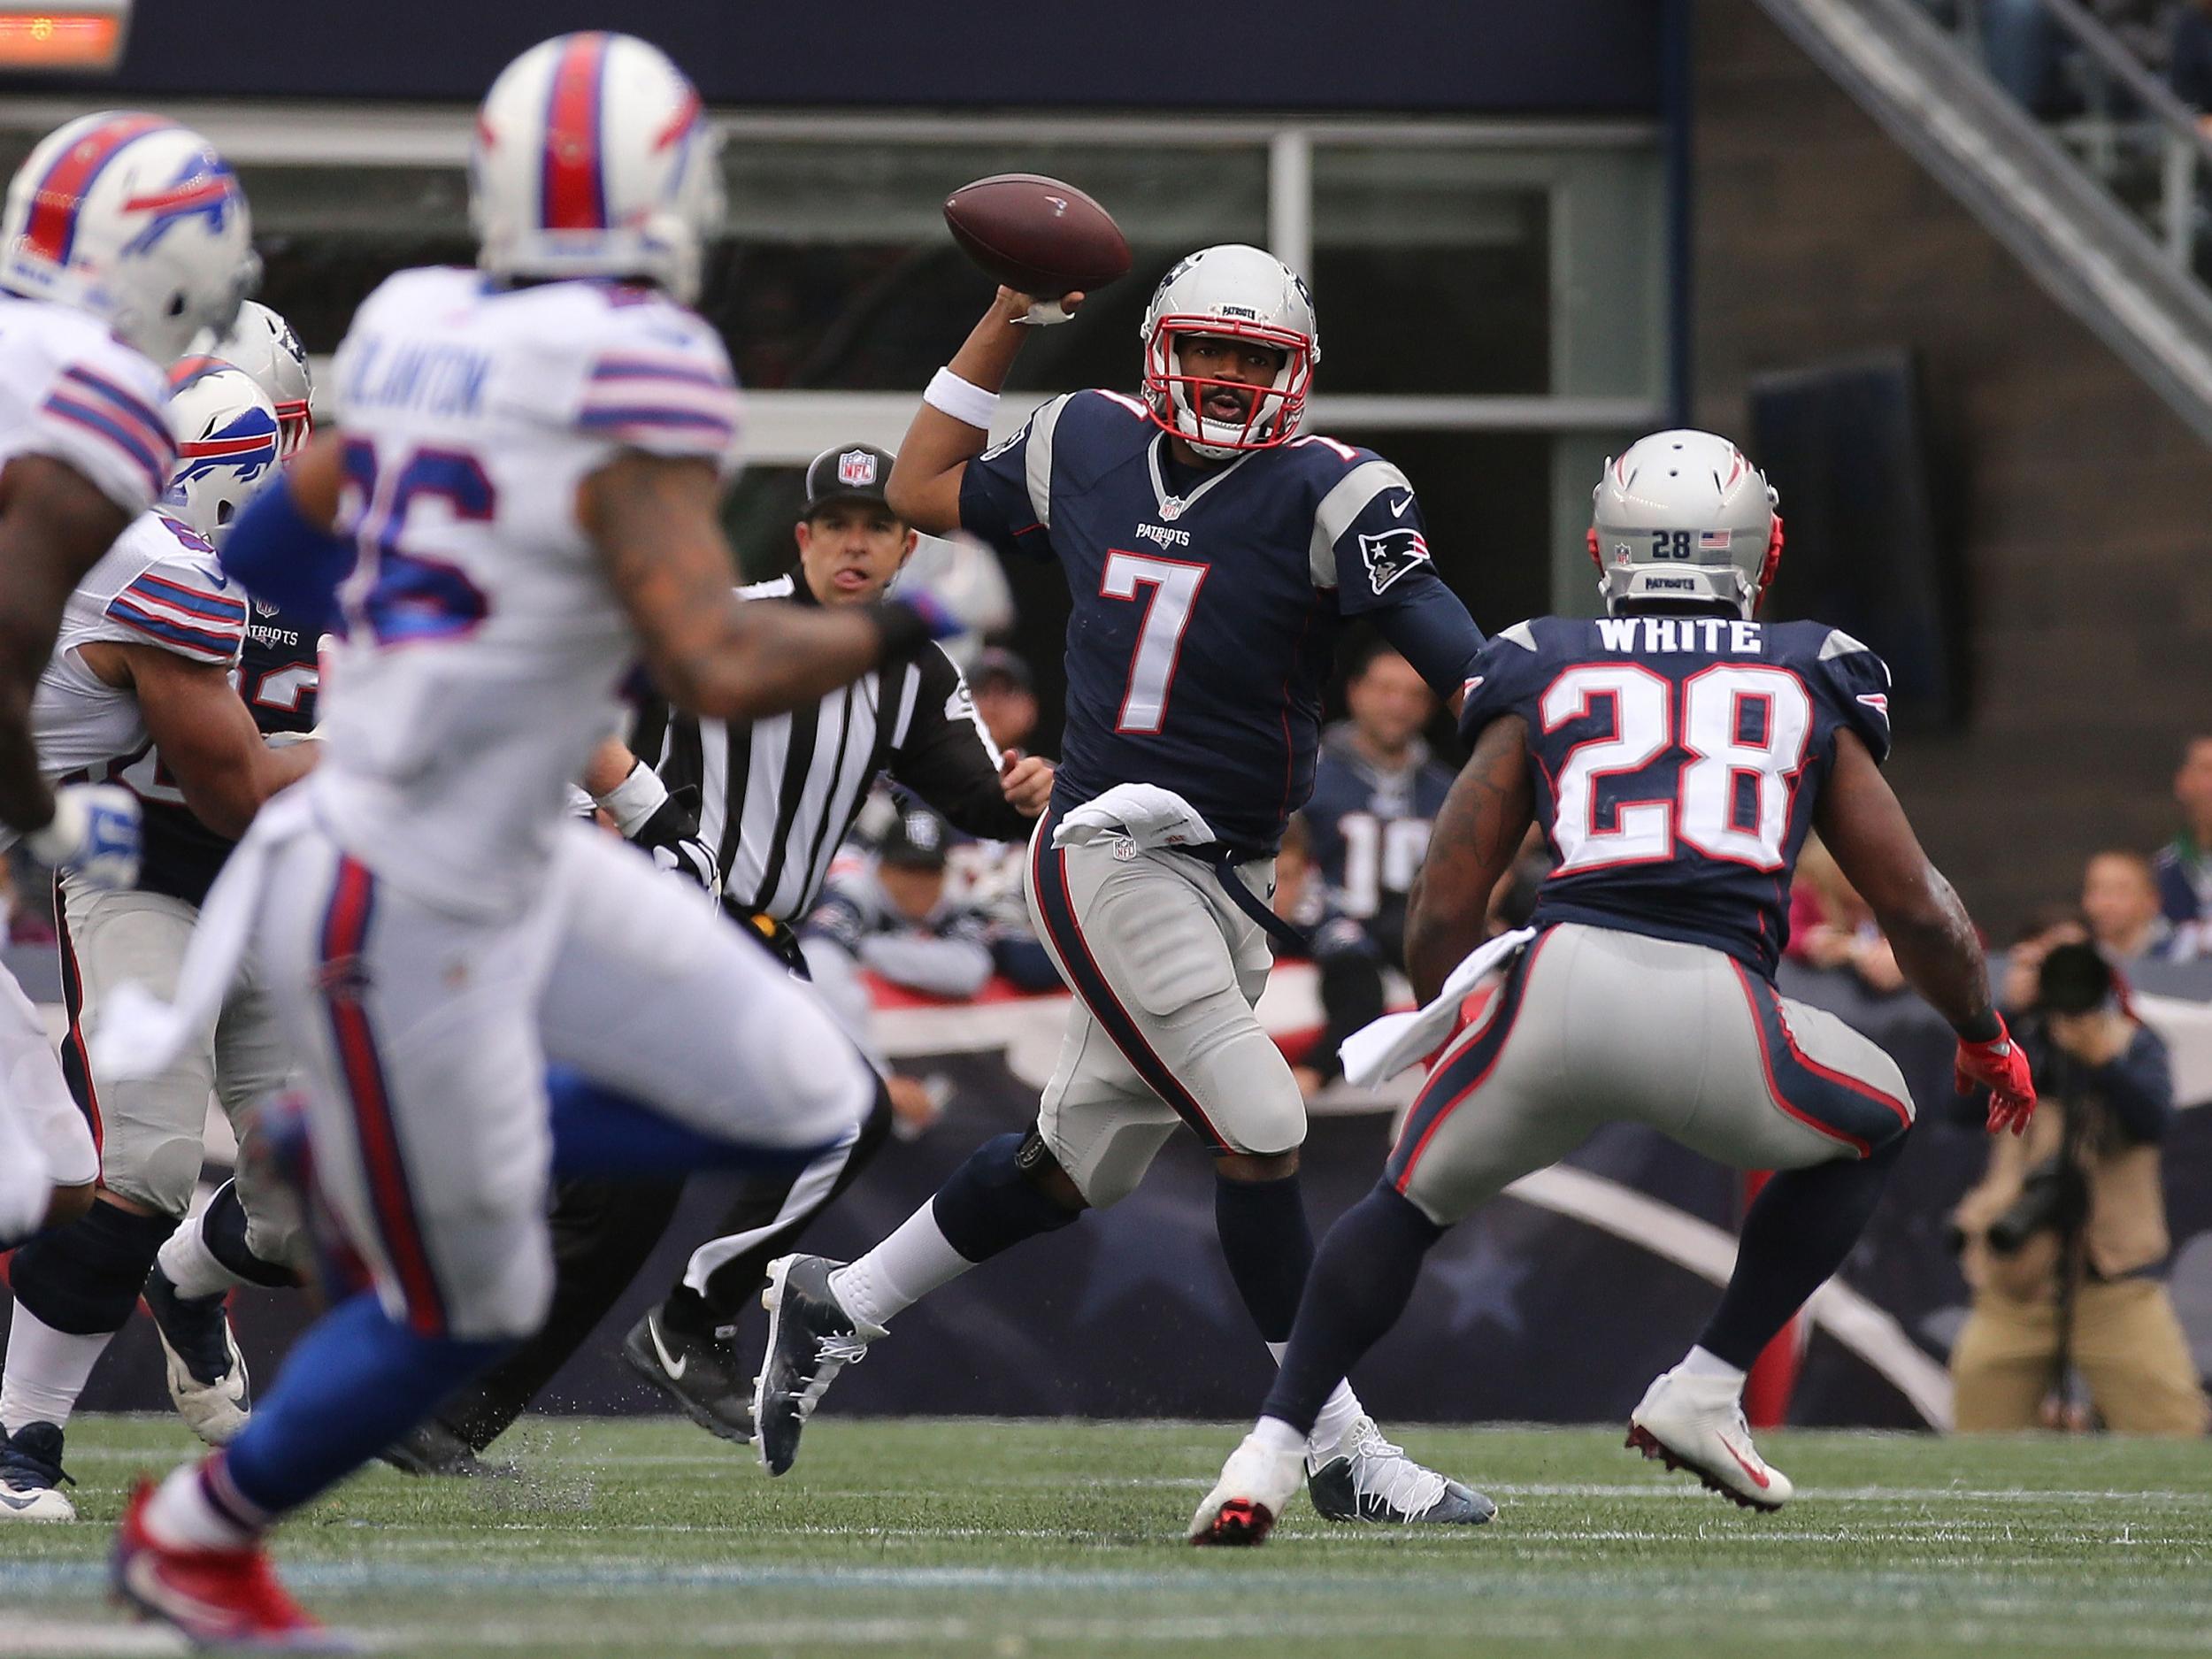 Jacoby Brissett, No.7, of the New England Patriots looks to pass in the second half against the Buffalo Bills at Gillette Stadium on October 2, 2016 in Foxboro, Massachusetts.